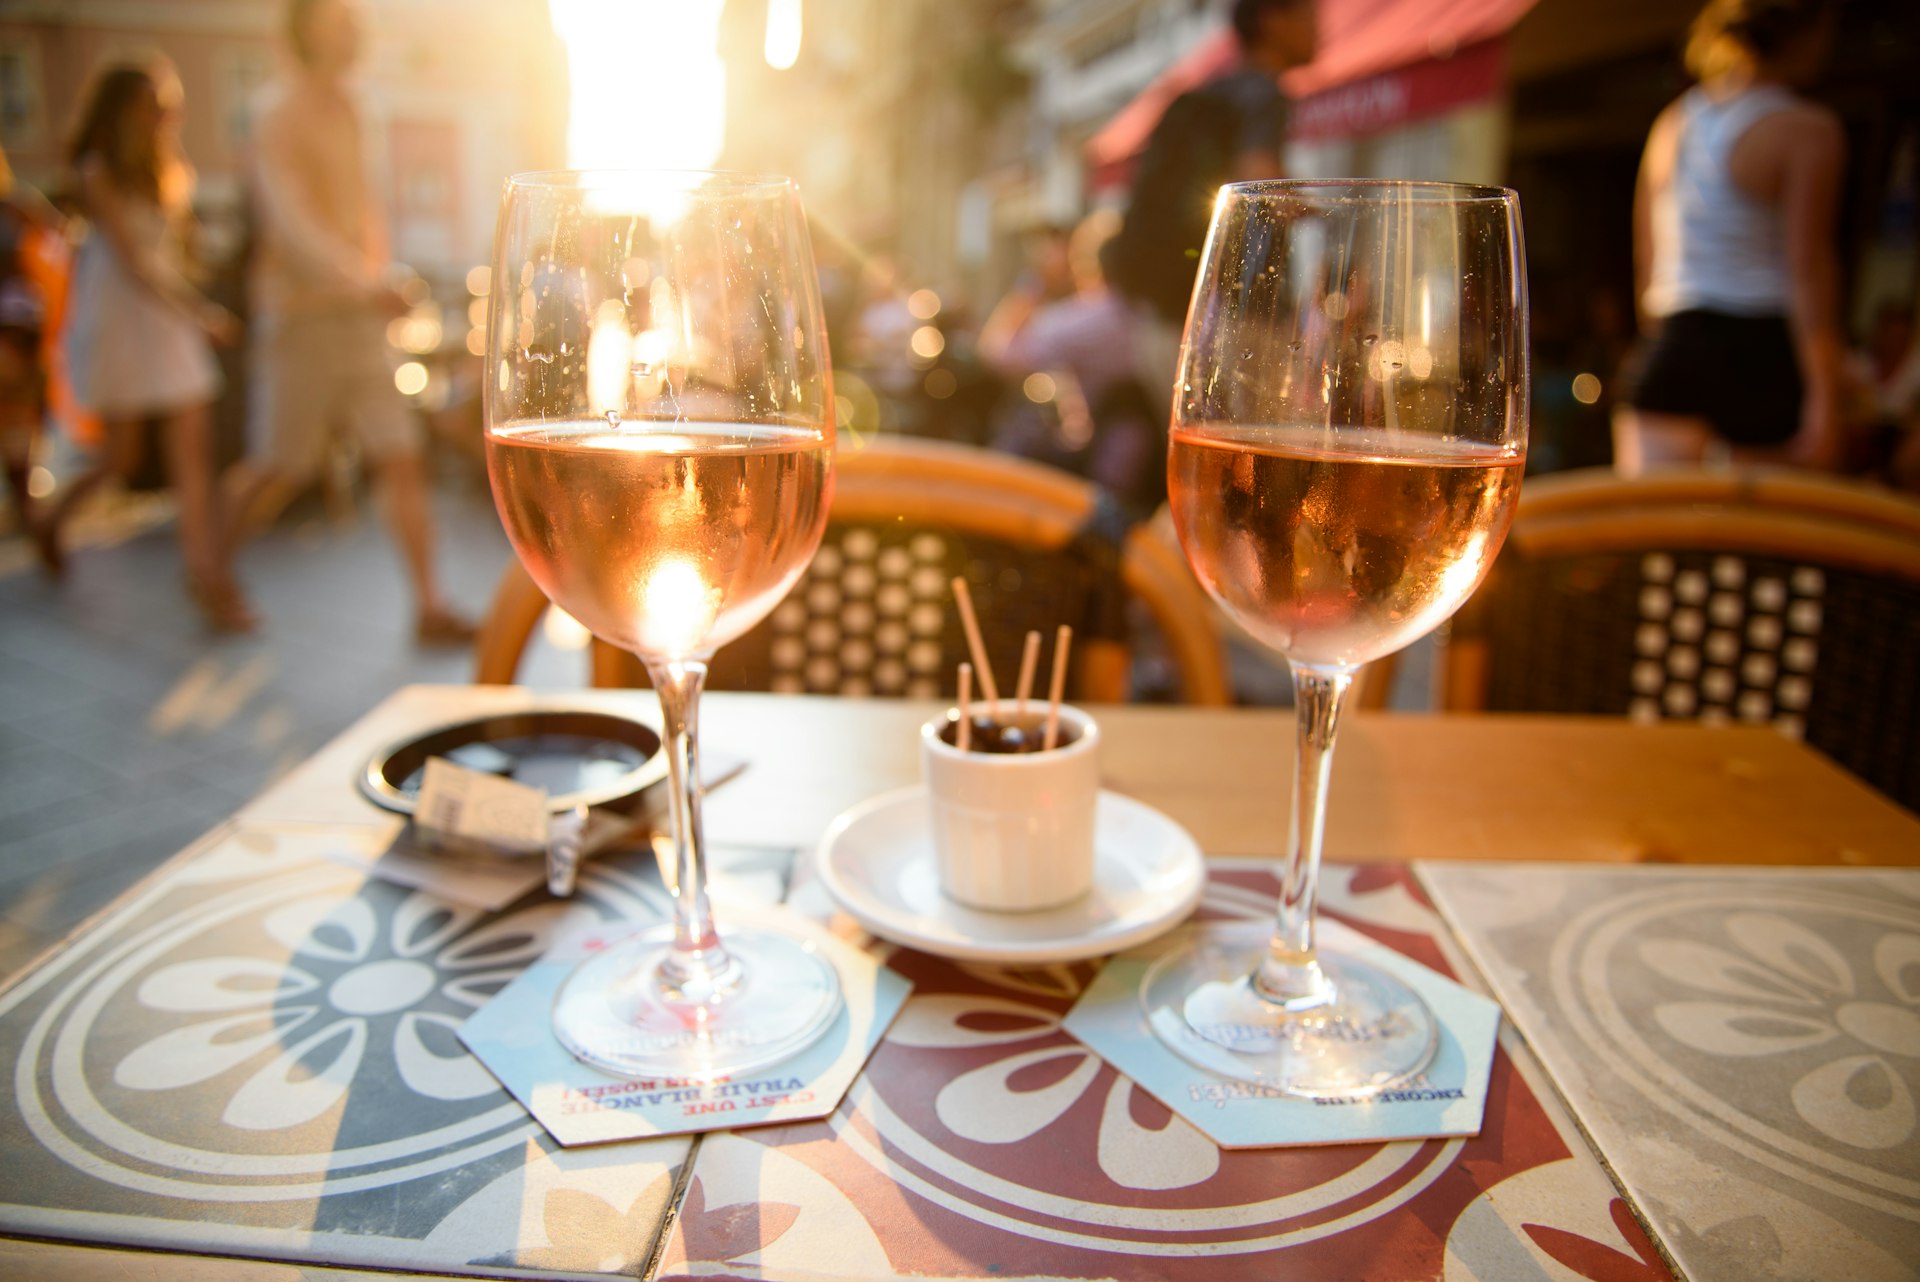 A glass of rosé wine is the perfect way to kick off an evening in Provence. Image © Iggi Falcon / Getty